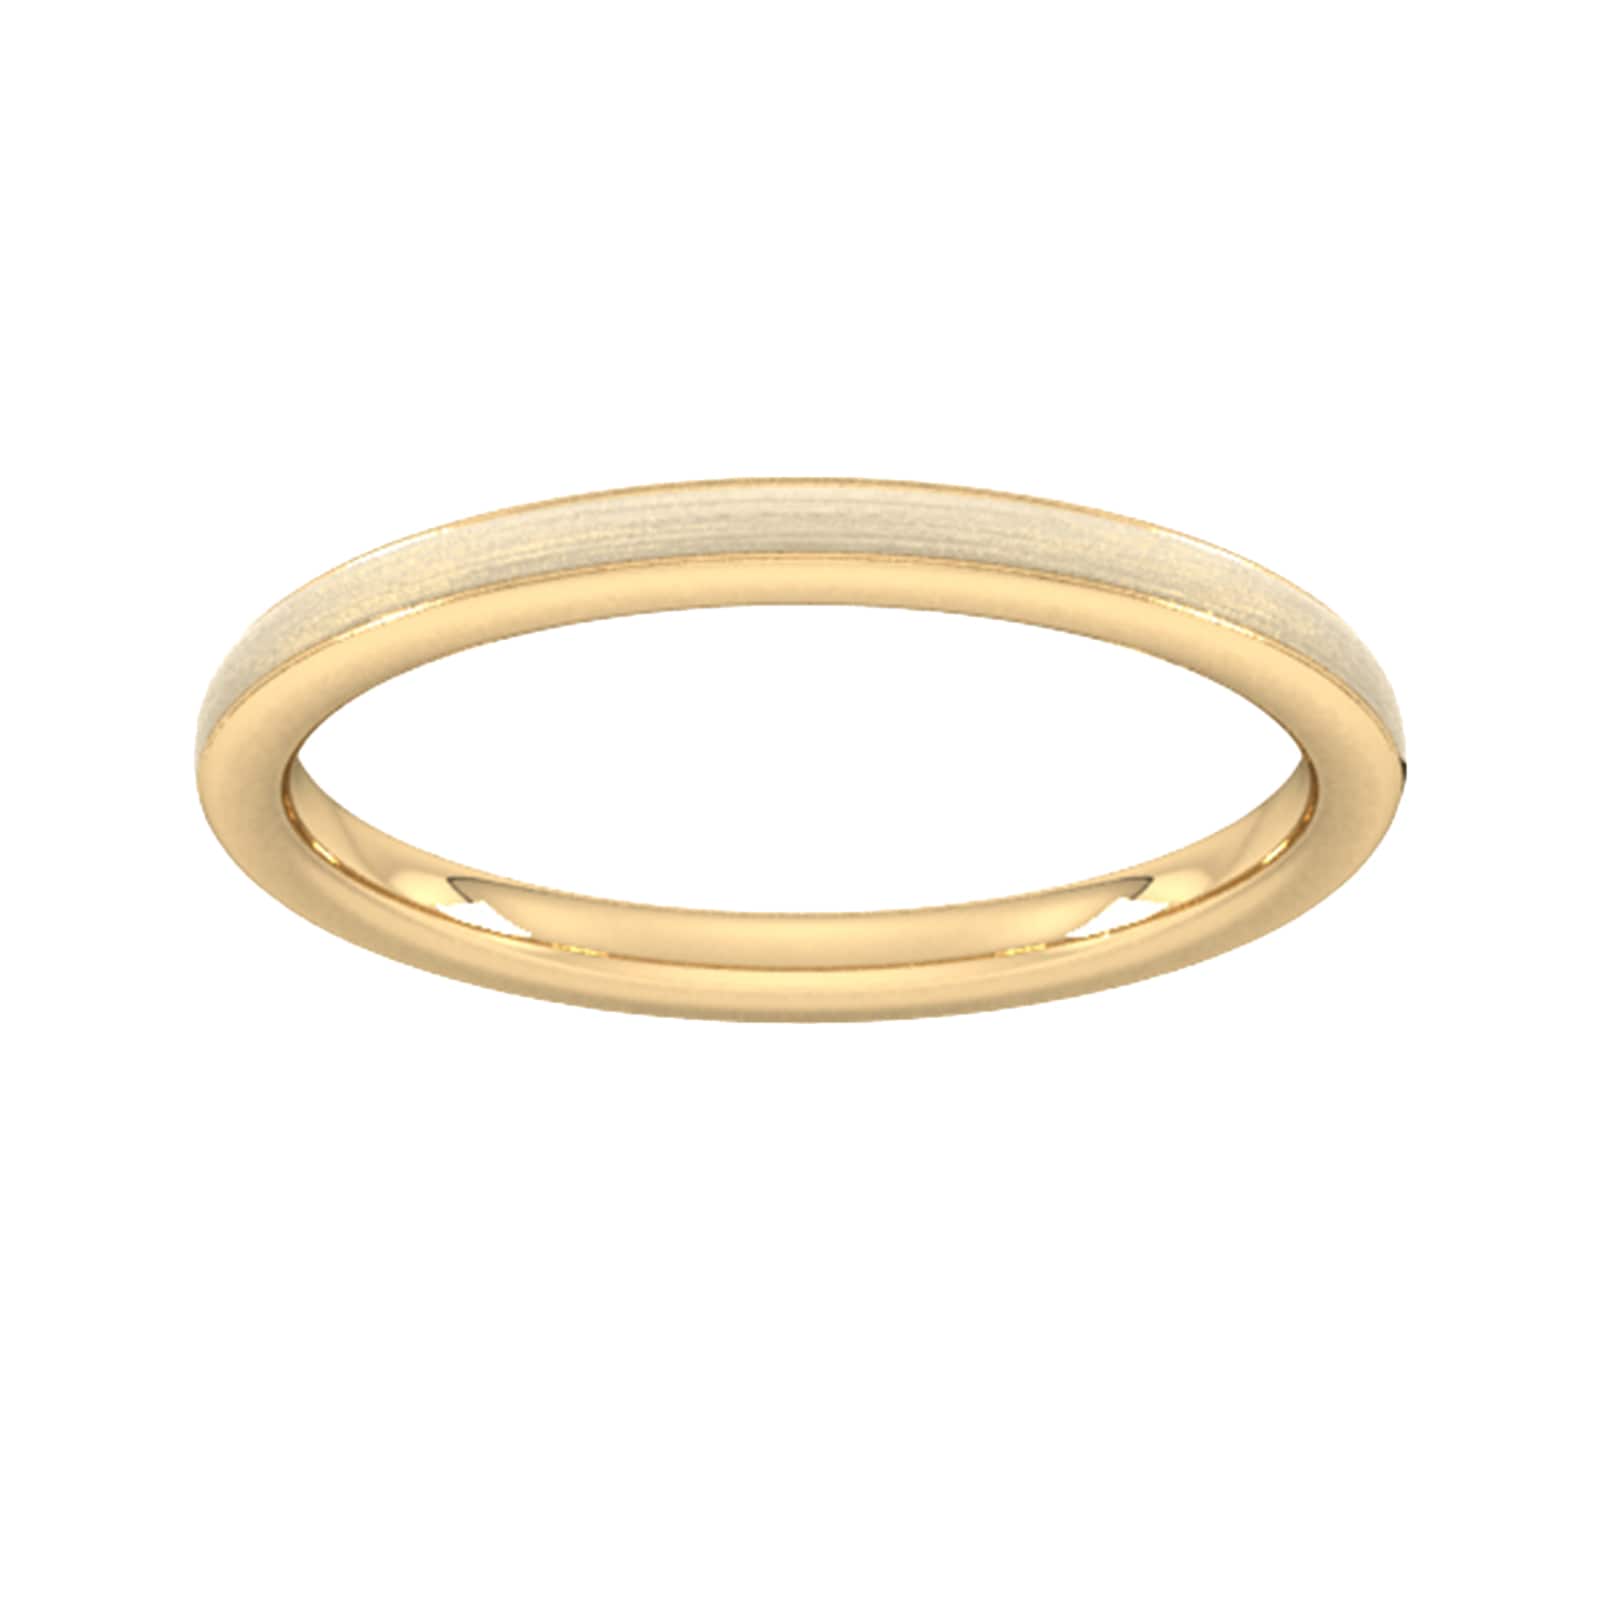 2mm Slight Court Extra Heavy Matt Centre With Grooves Wedding Ring In 9 Carat Yellow Gold - Ring Size U